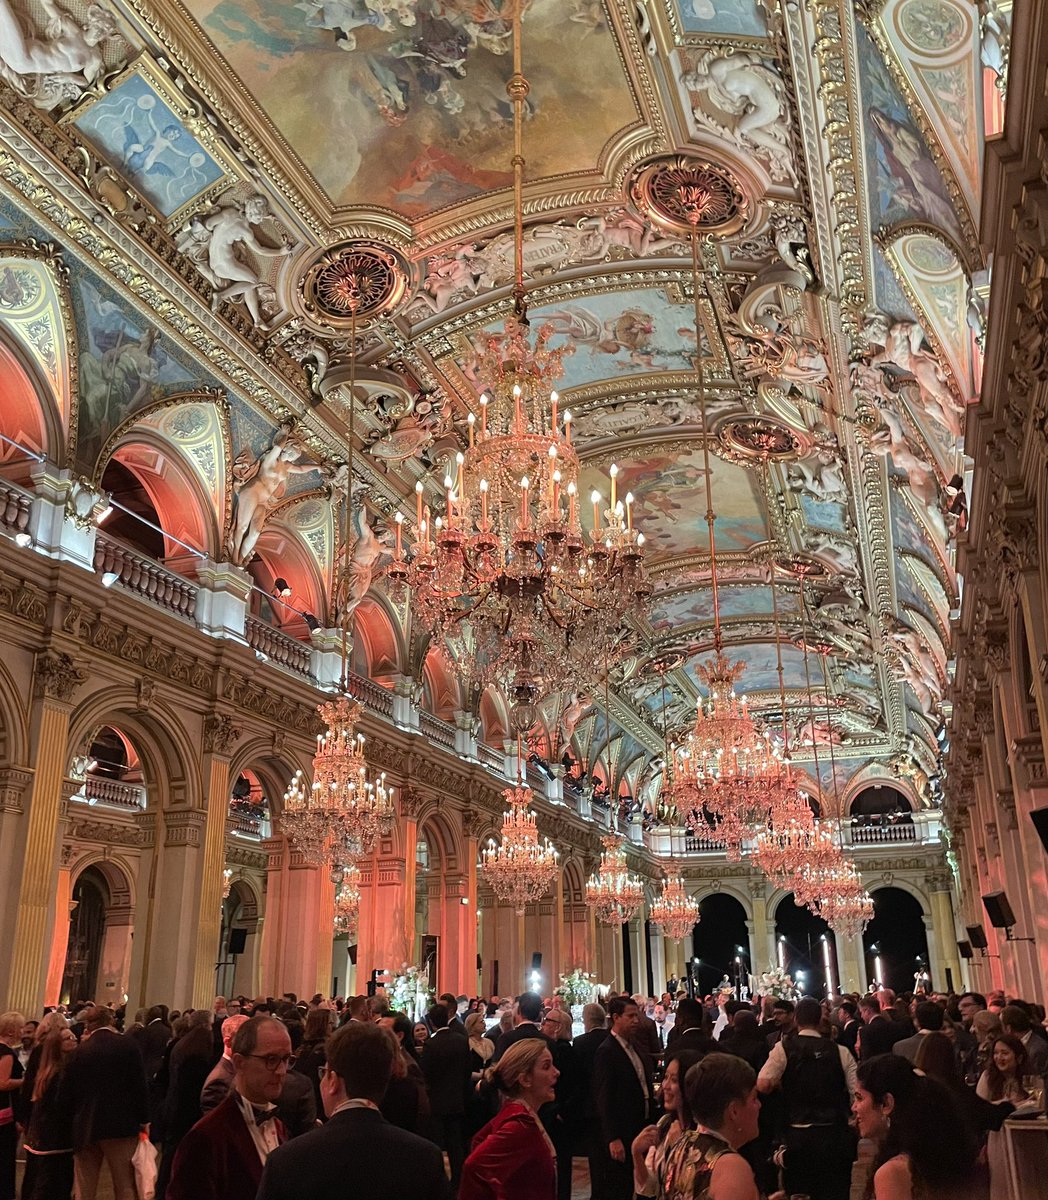 Paris really knows how to put on a function. Have had a wonderful week meeting and reconnecting with colleagues from all over the world. Amazing city. #IBA #IBAParis